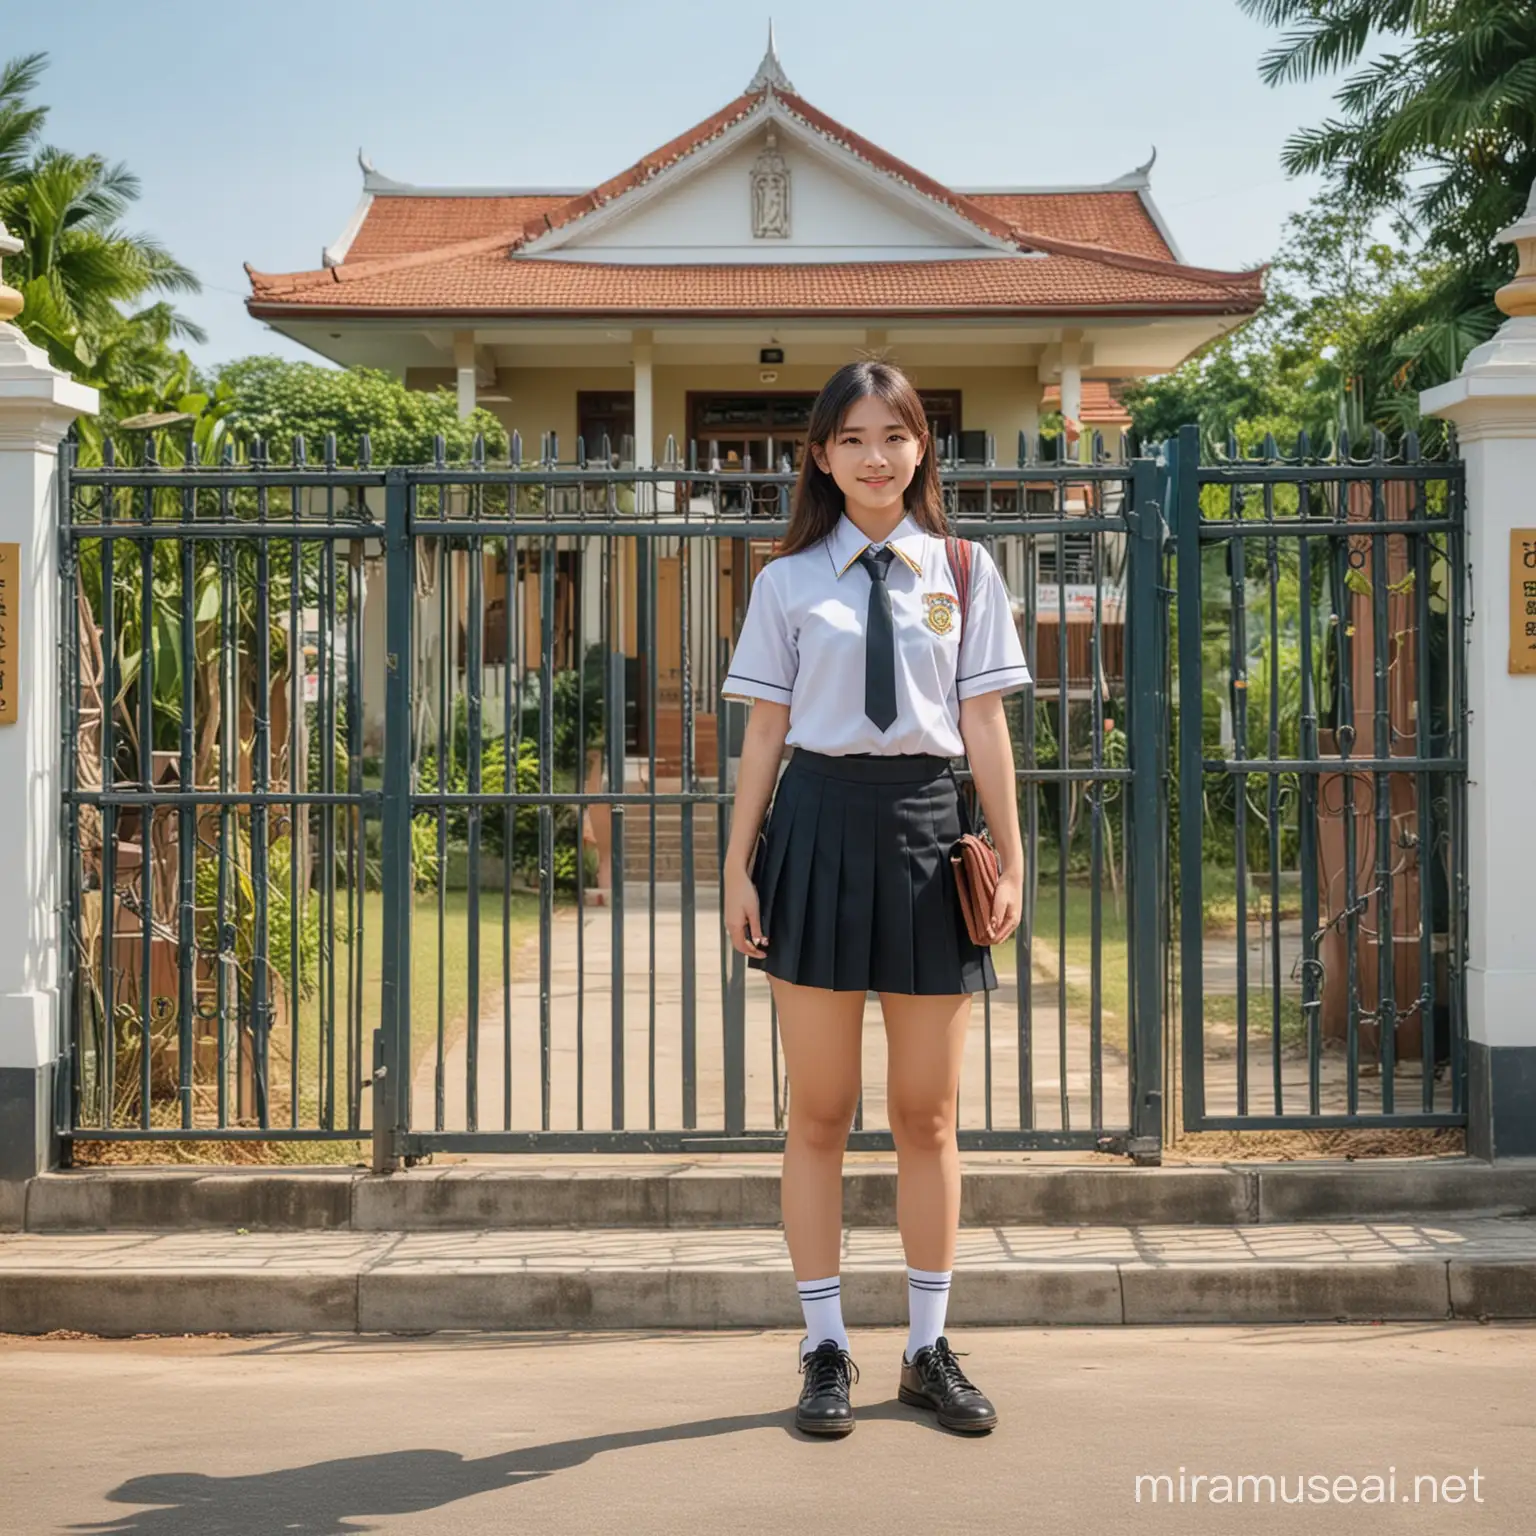 A couple Boy and girl in Thailand high school uniform, full body couple picture stand in front of school front gate in a sunshine day